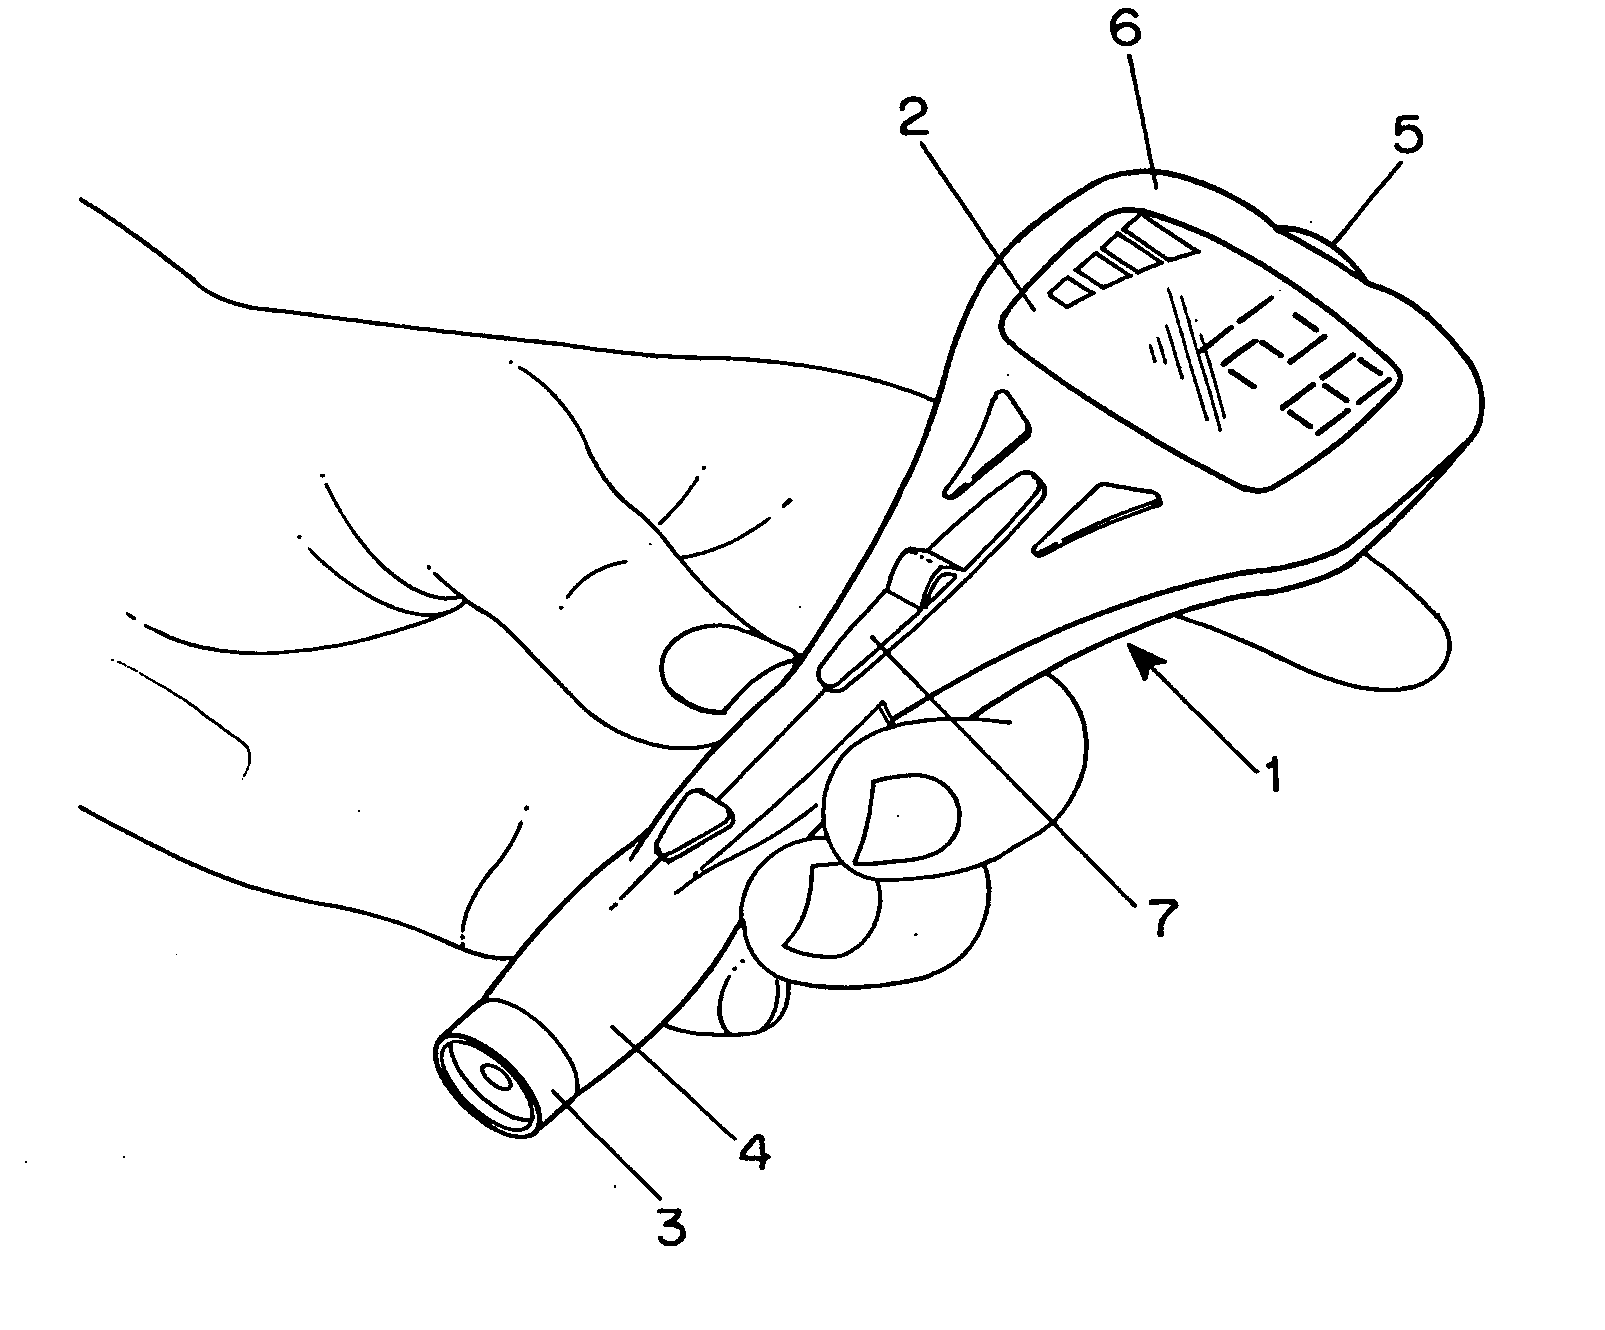 Combined lancet and electrochemical analyte-testing apparatus